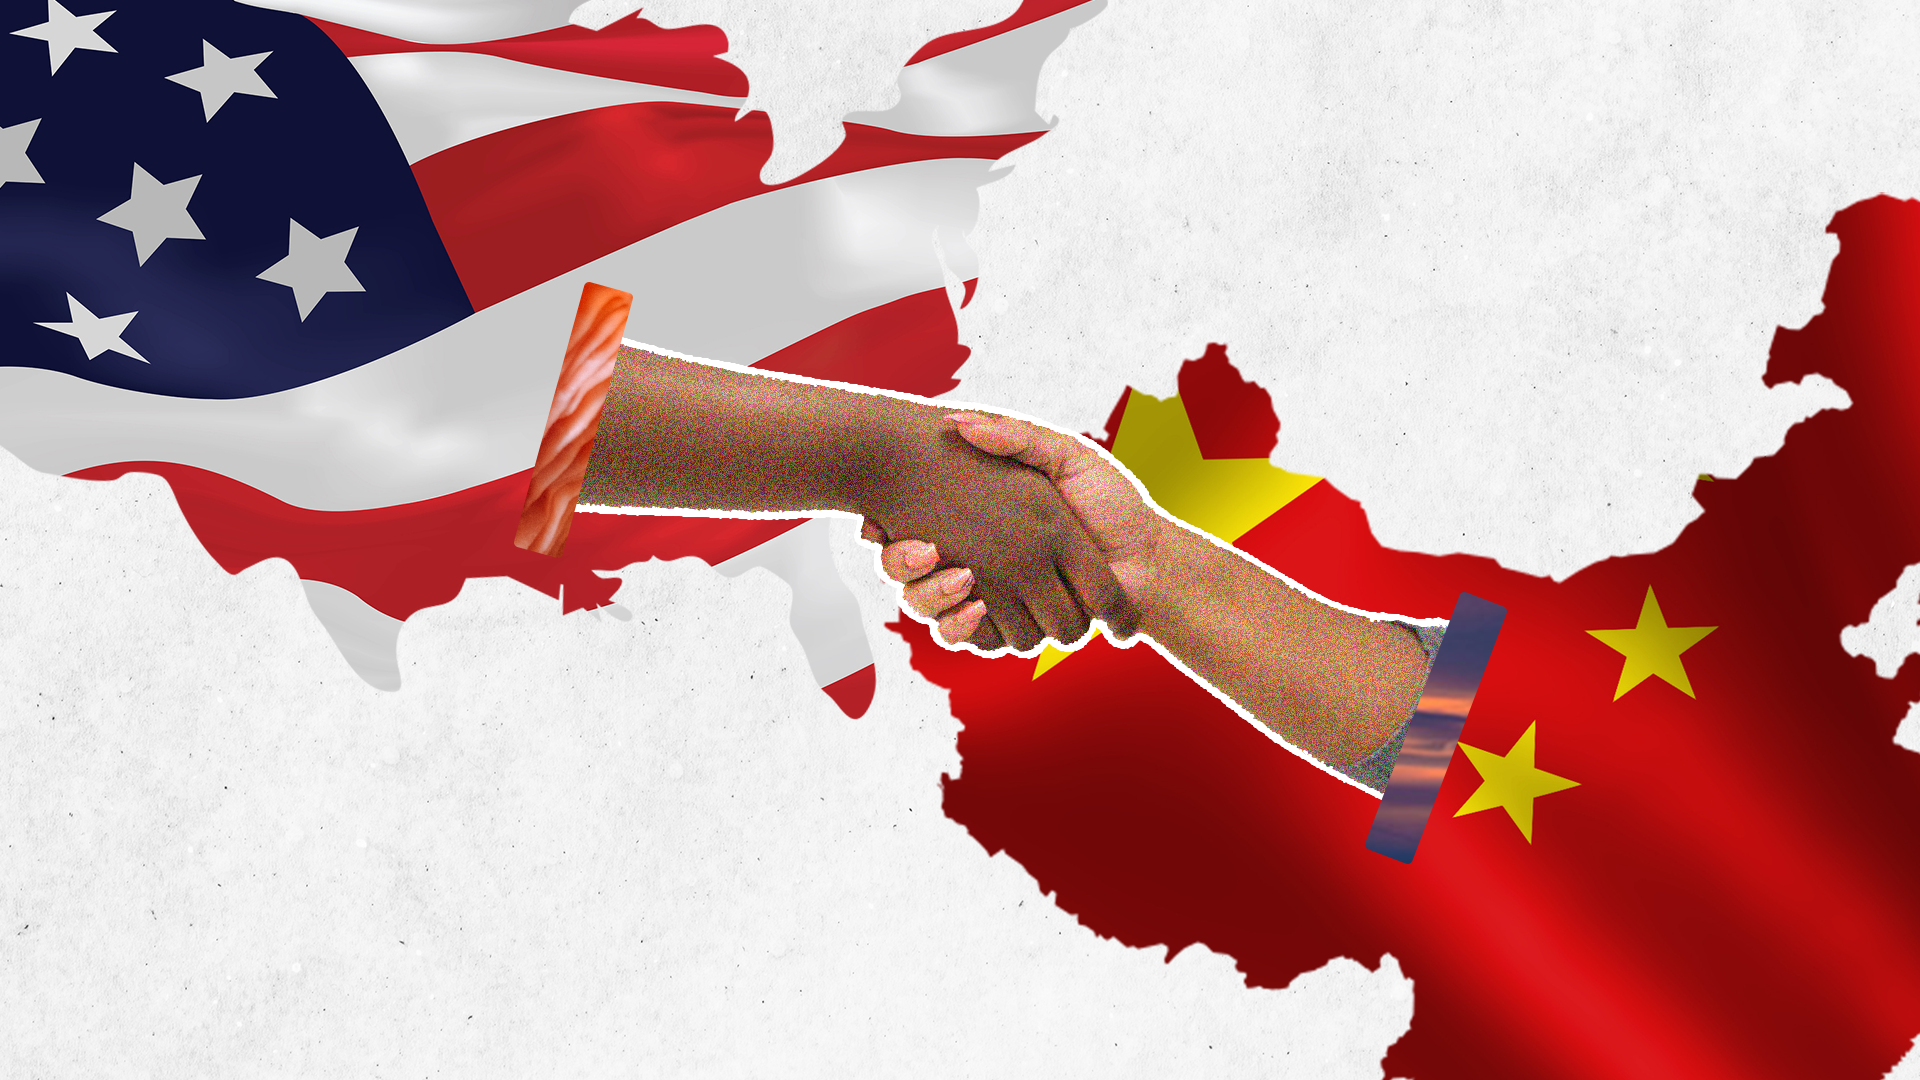 A graphic showing shaking hands from the United States and China